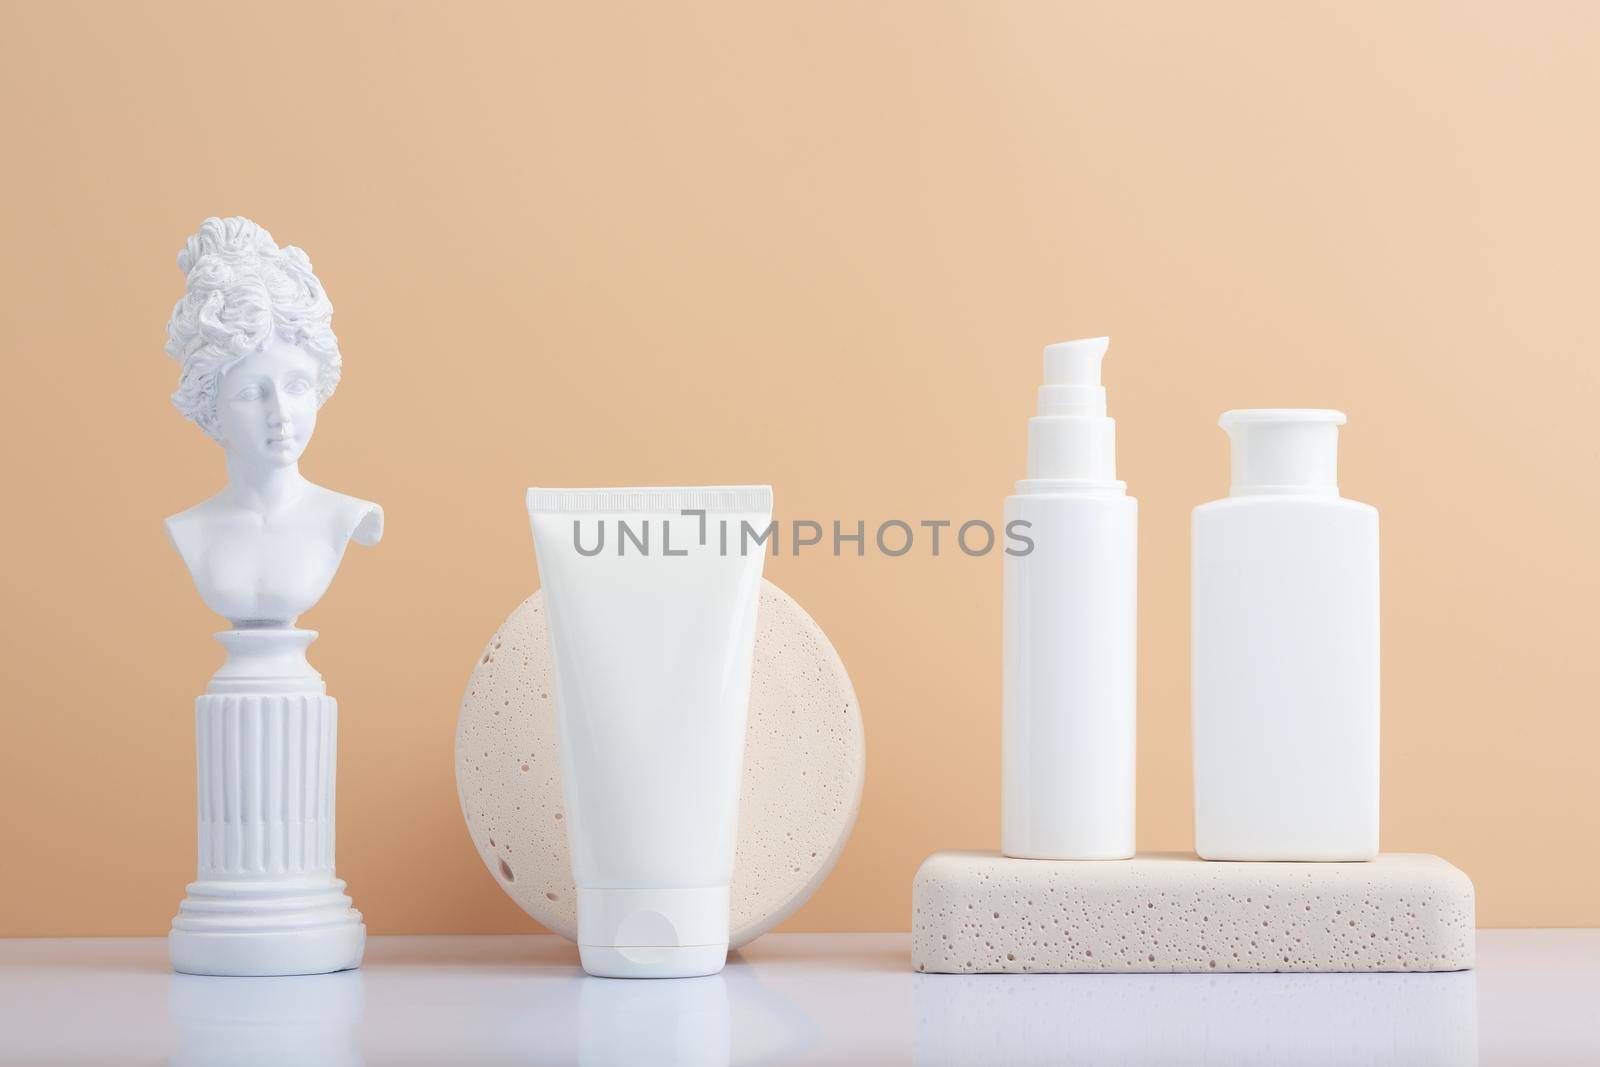 Set of skin care products with gypsum figure of a woman on white table against beige background by Senorina_Irina